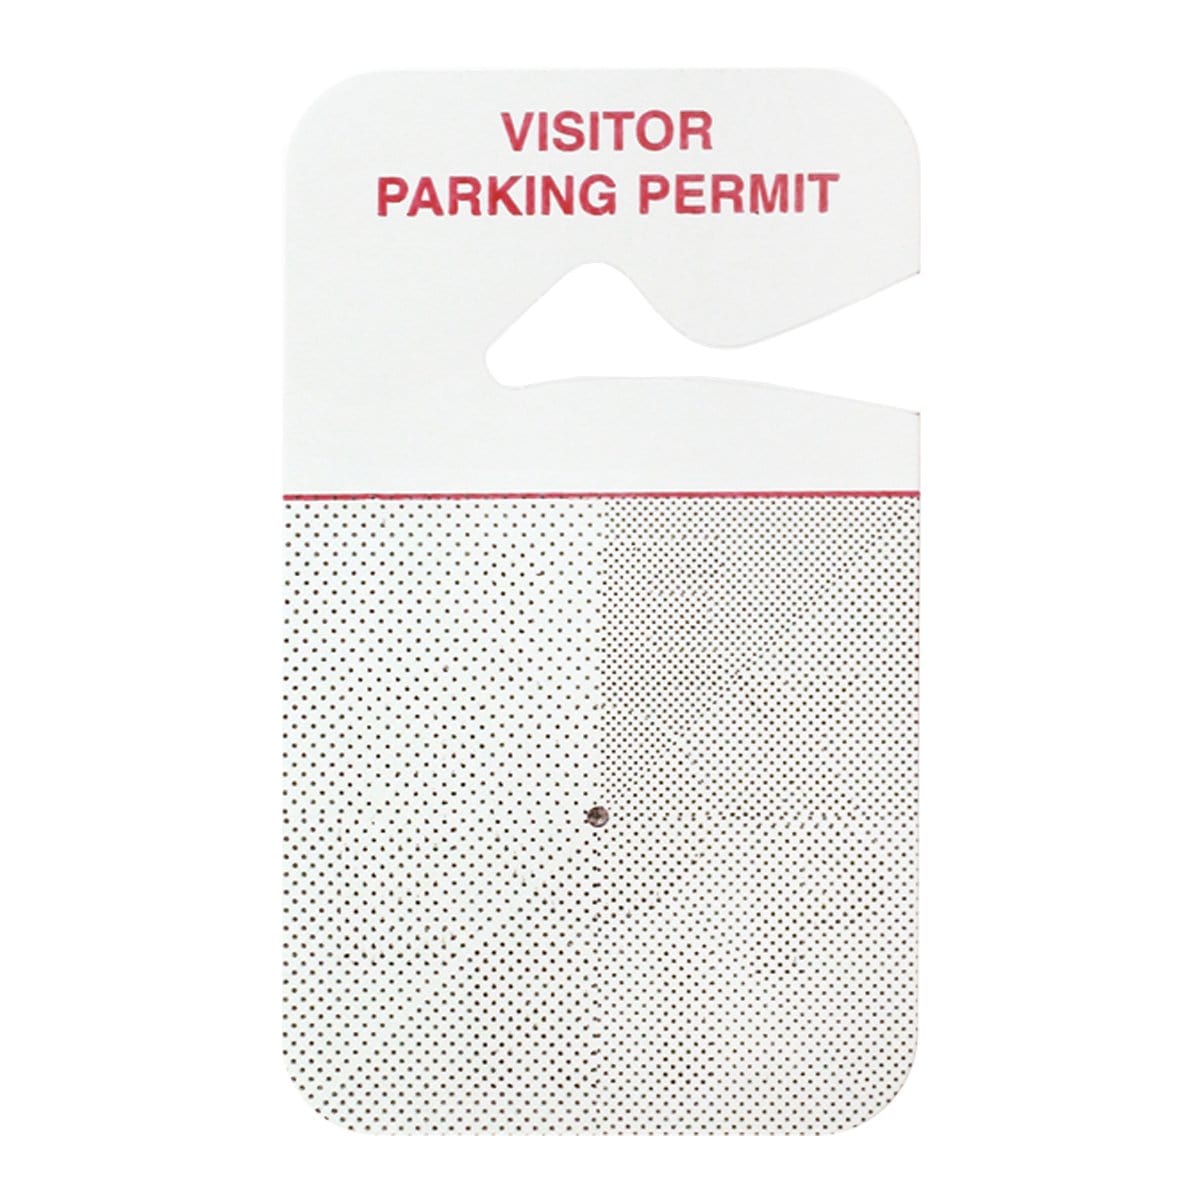 A white hanging tag with the text "Visitor Parking Permit" in red at the top. The lower half features a dotted pattern, ideal for visitor management and temporary parking permits, such as the 500 Pack - Temporary Expiring Hangtag "VISITOR PARKING PERMIT" (P/N 05139).